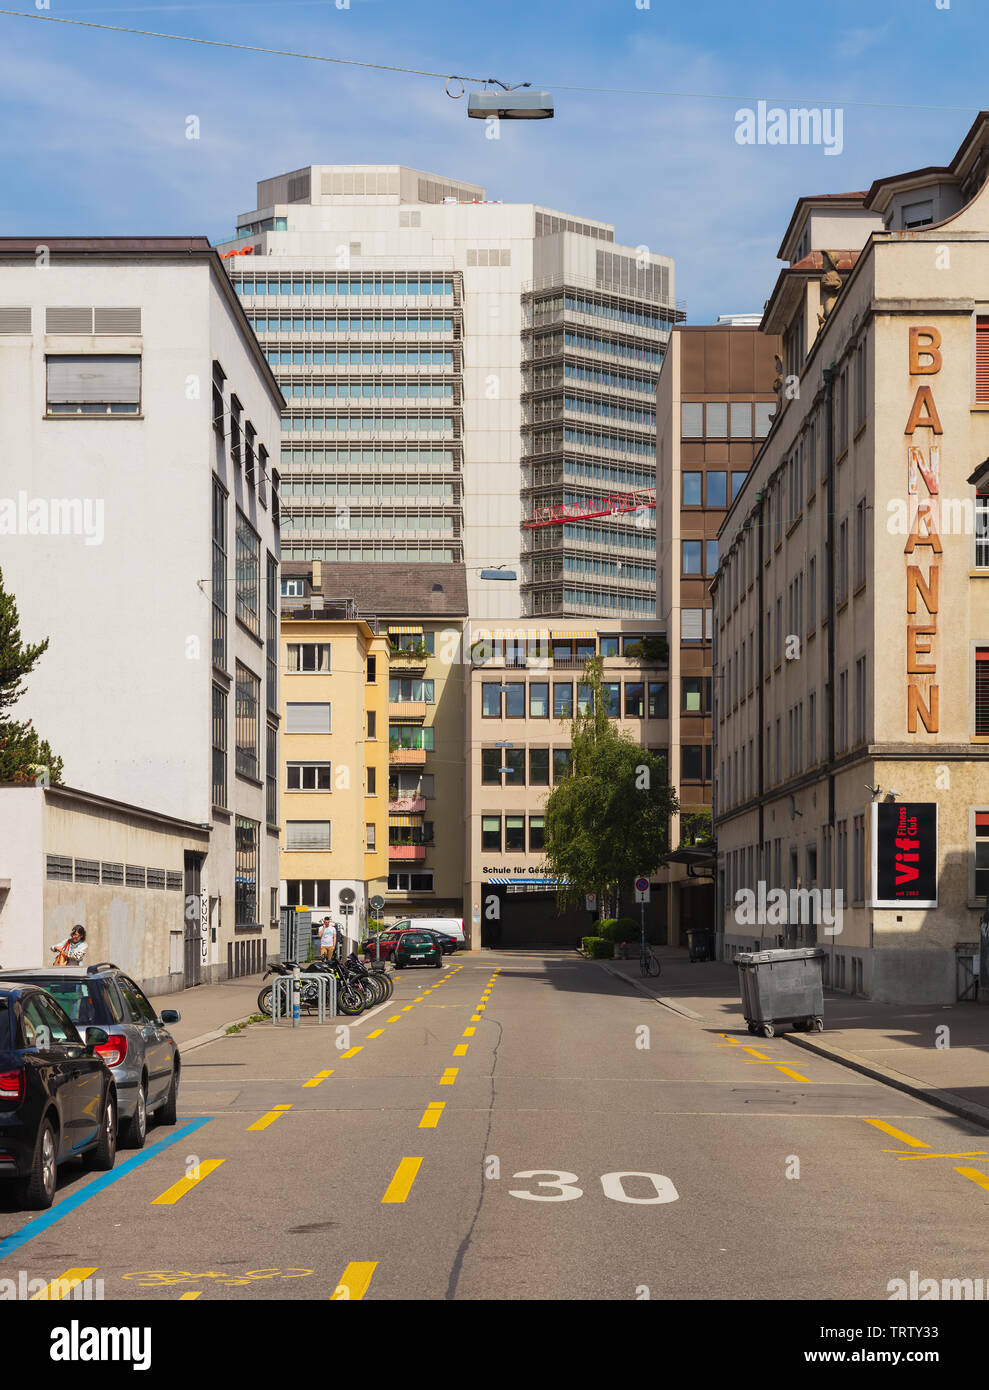 Zurich, Switzerland - May 27, 2019: view along Ausstellungsstrasse street in the city of Zurich, building of the headquarters of the Migros company Stock Photo